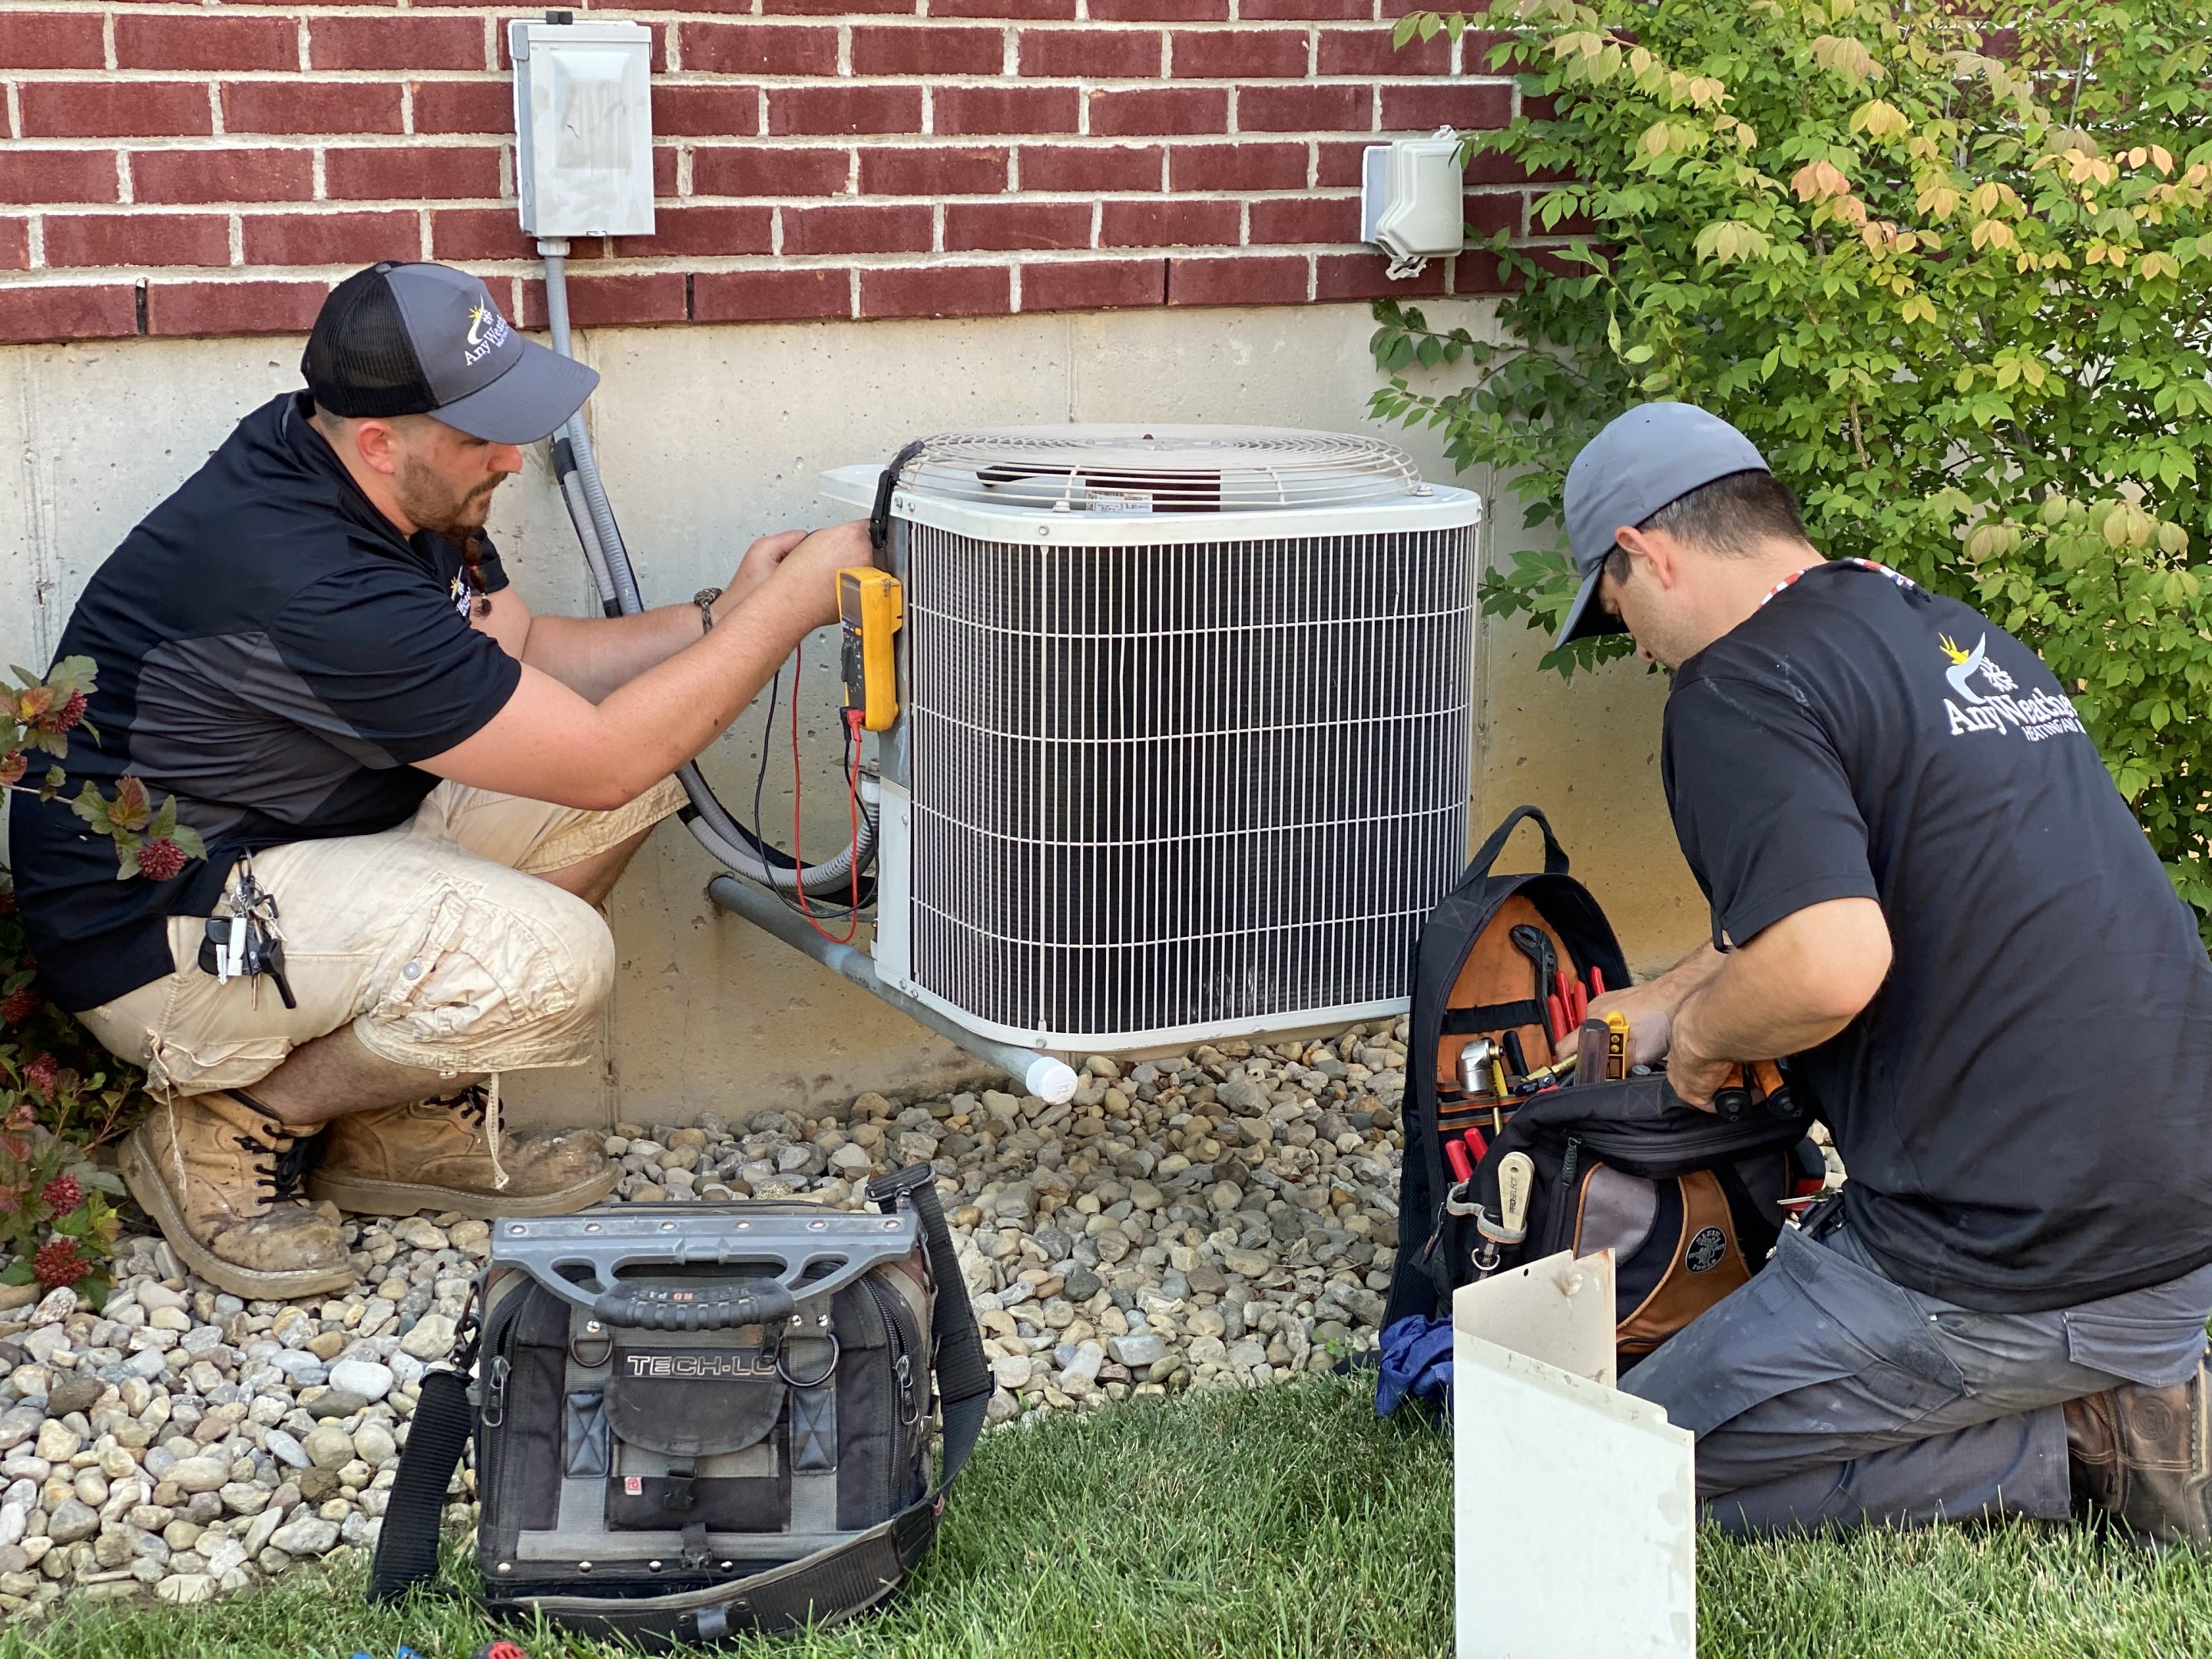 NKY Air Conditioner installation and repair